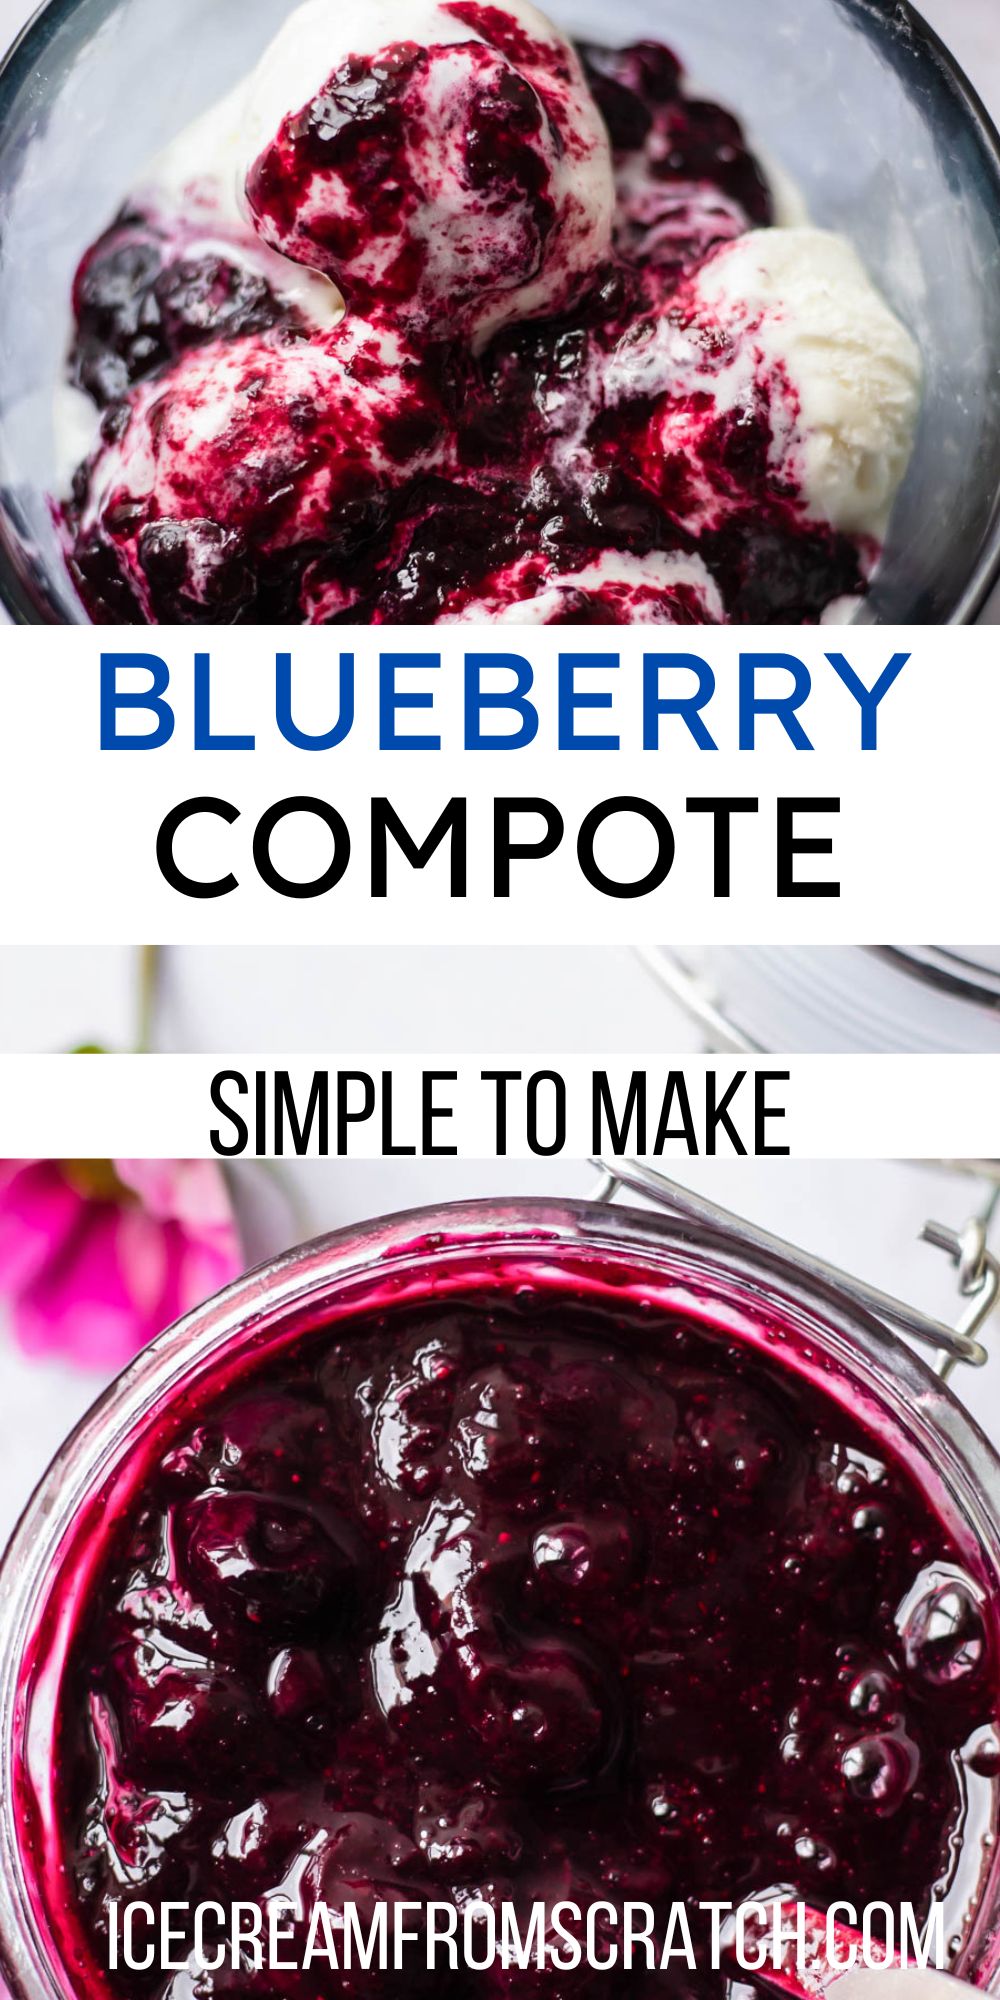 Two images of blueberry compote and ice cream. Text box in center says "Blueberry Compote. Simple to Make"